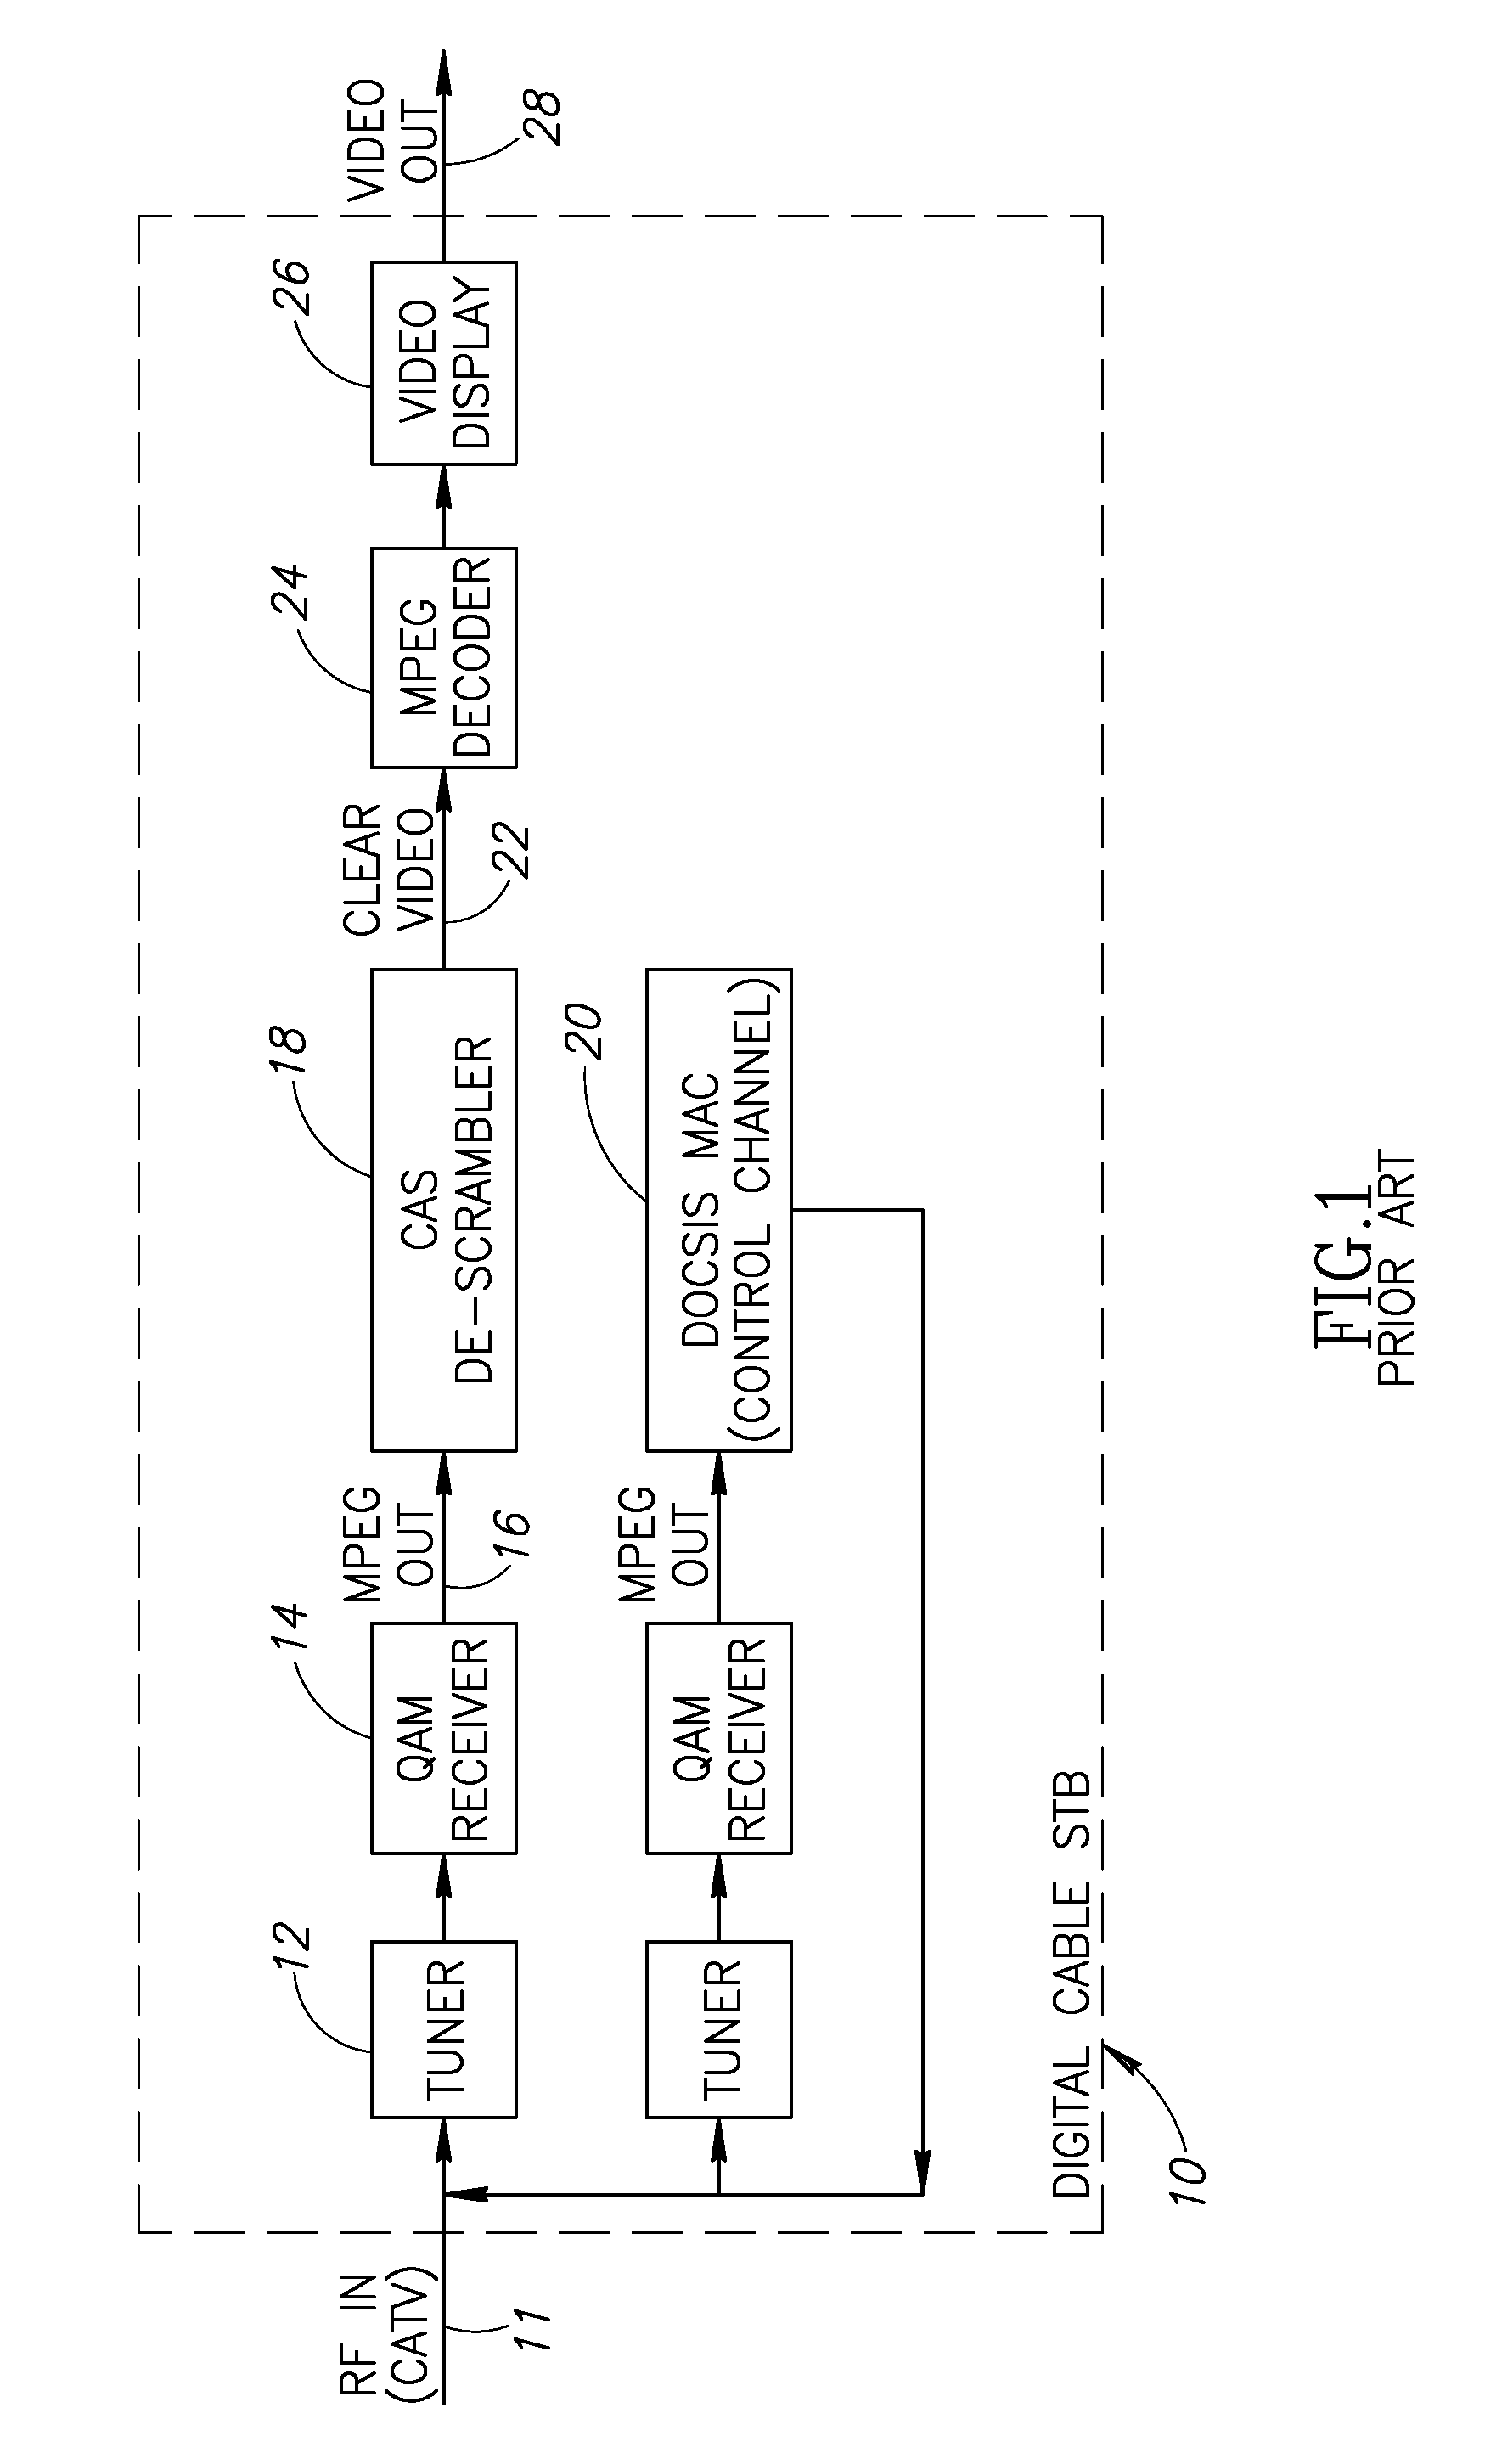 Hybrid mpeg/ip digital cable gateway device and architecture associated therewith